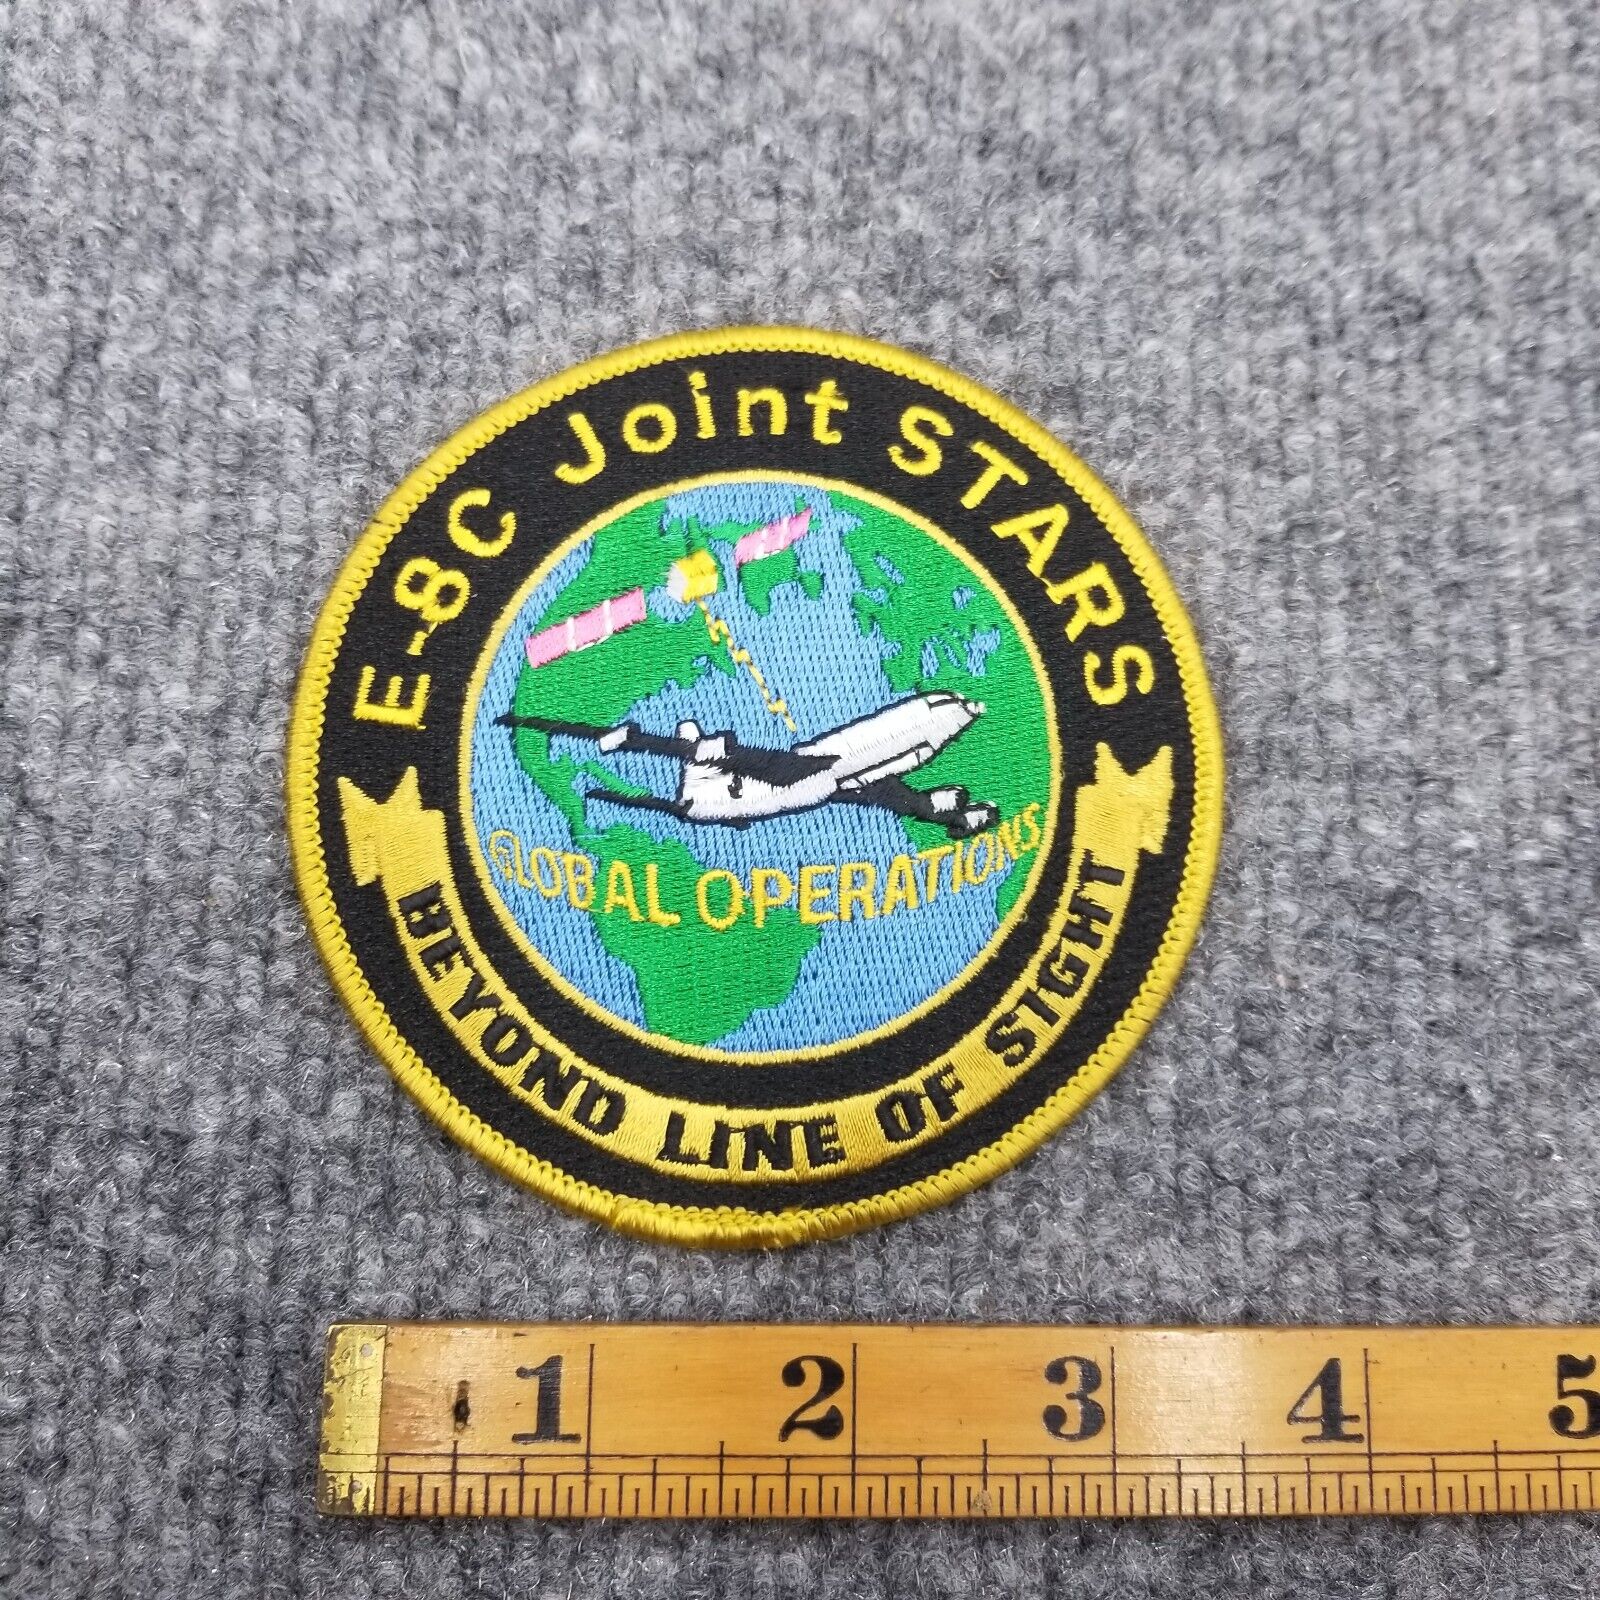 E-8C Joint Stars Global Operations Patch Beyond Line Of Sight Air Force